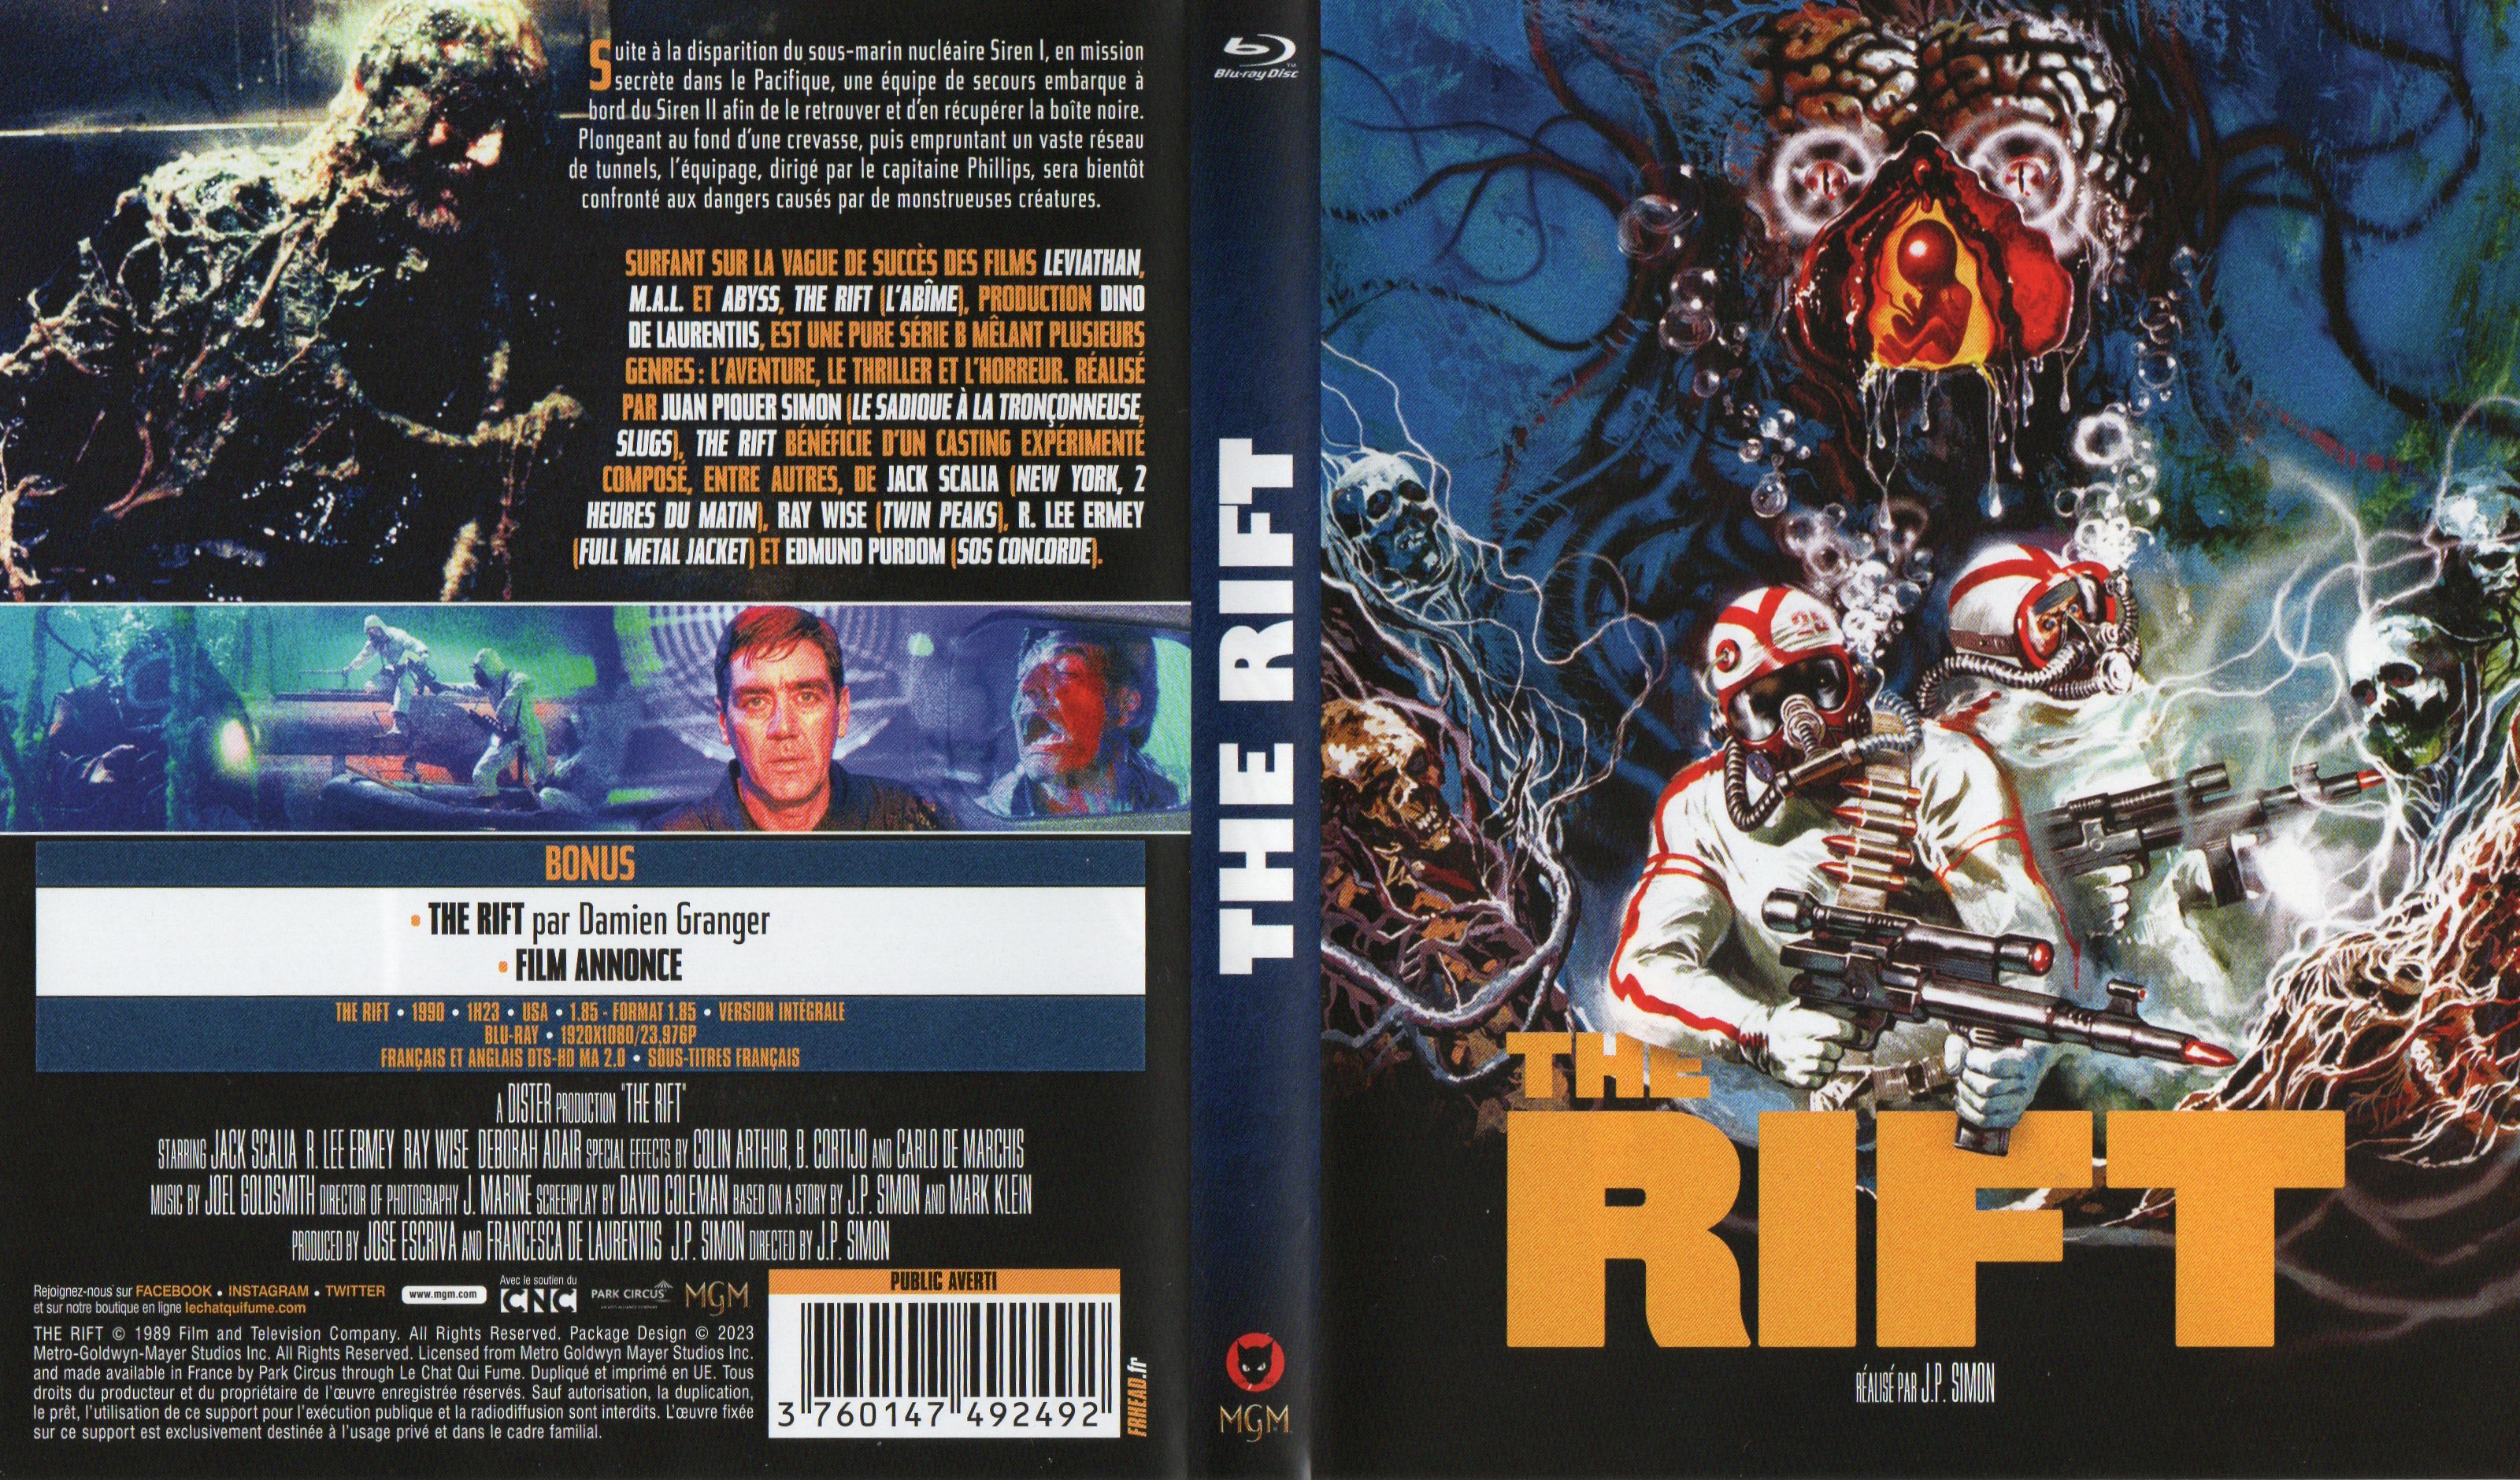 Jaquette DVD The rift (BLU-RAY)